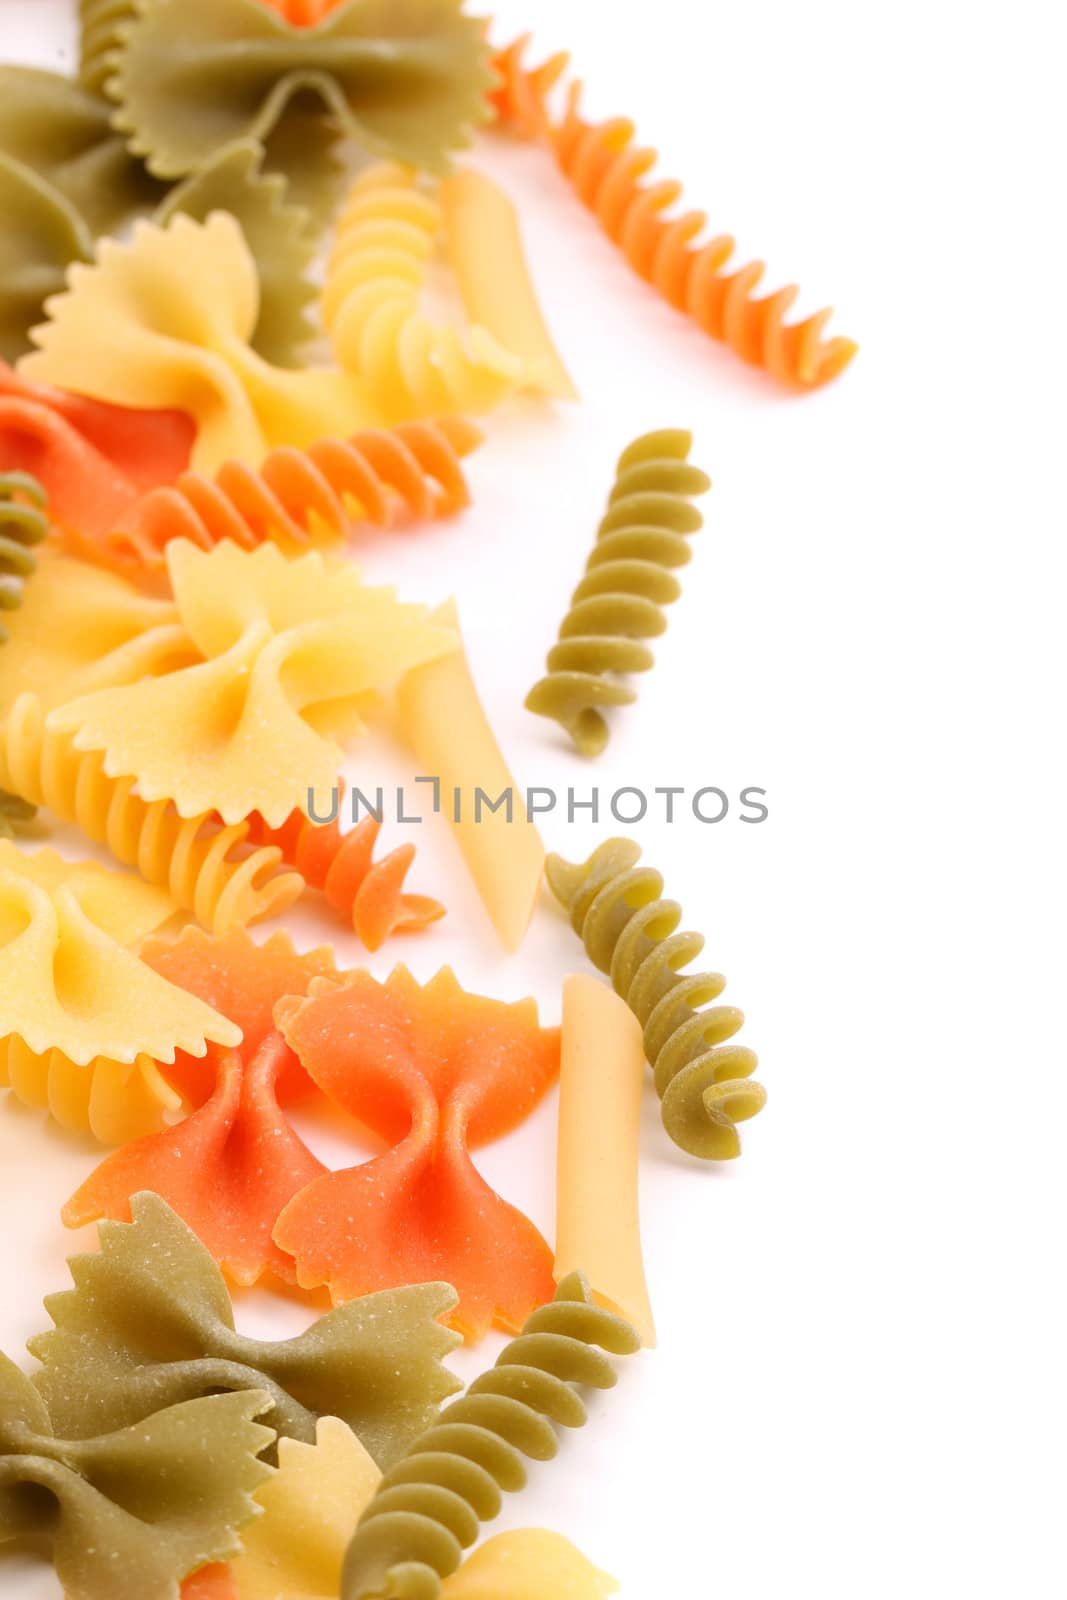 A different pasta in three colors close-up are located right on the white background.